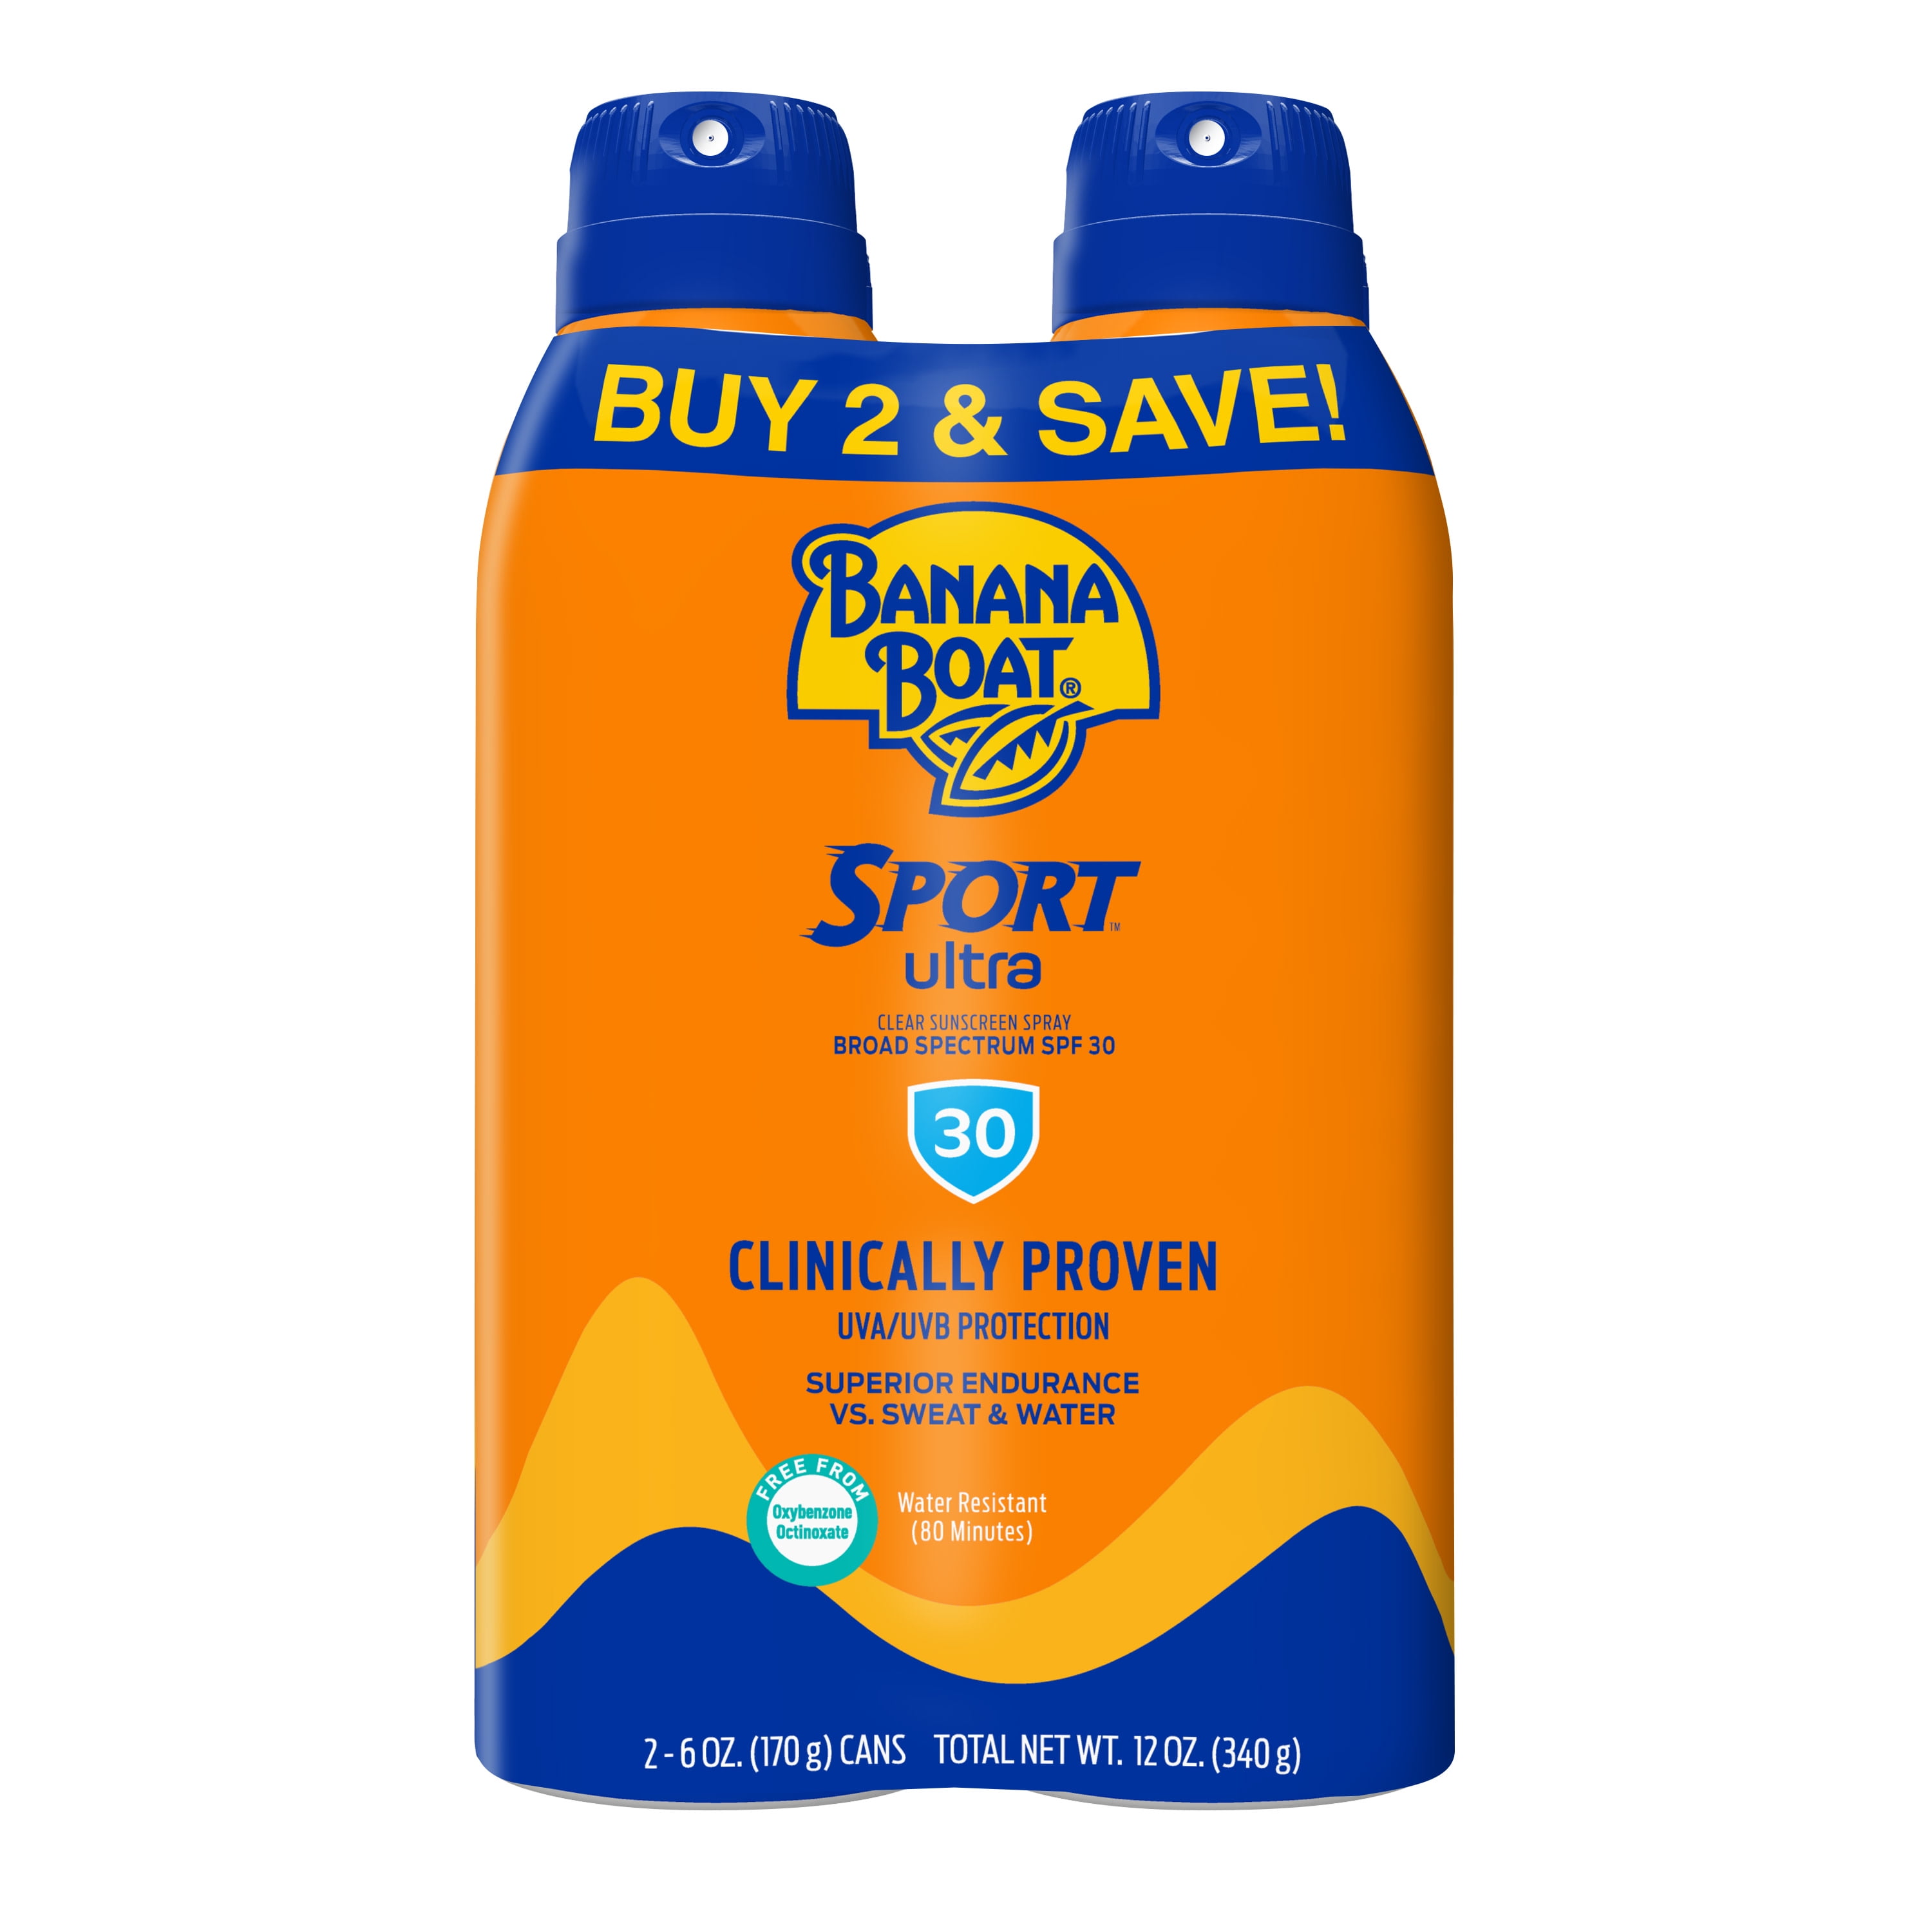 Banana Boat Sport Ultra Sunscreen Spray 12 Oz Twin Pack, 30 SPF, Water Resistant Sunblock (80 Minutes), Superior Endurance VS Sweat And Water